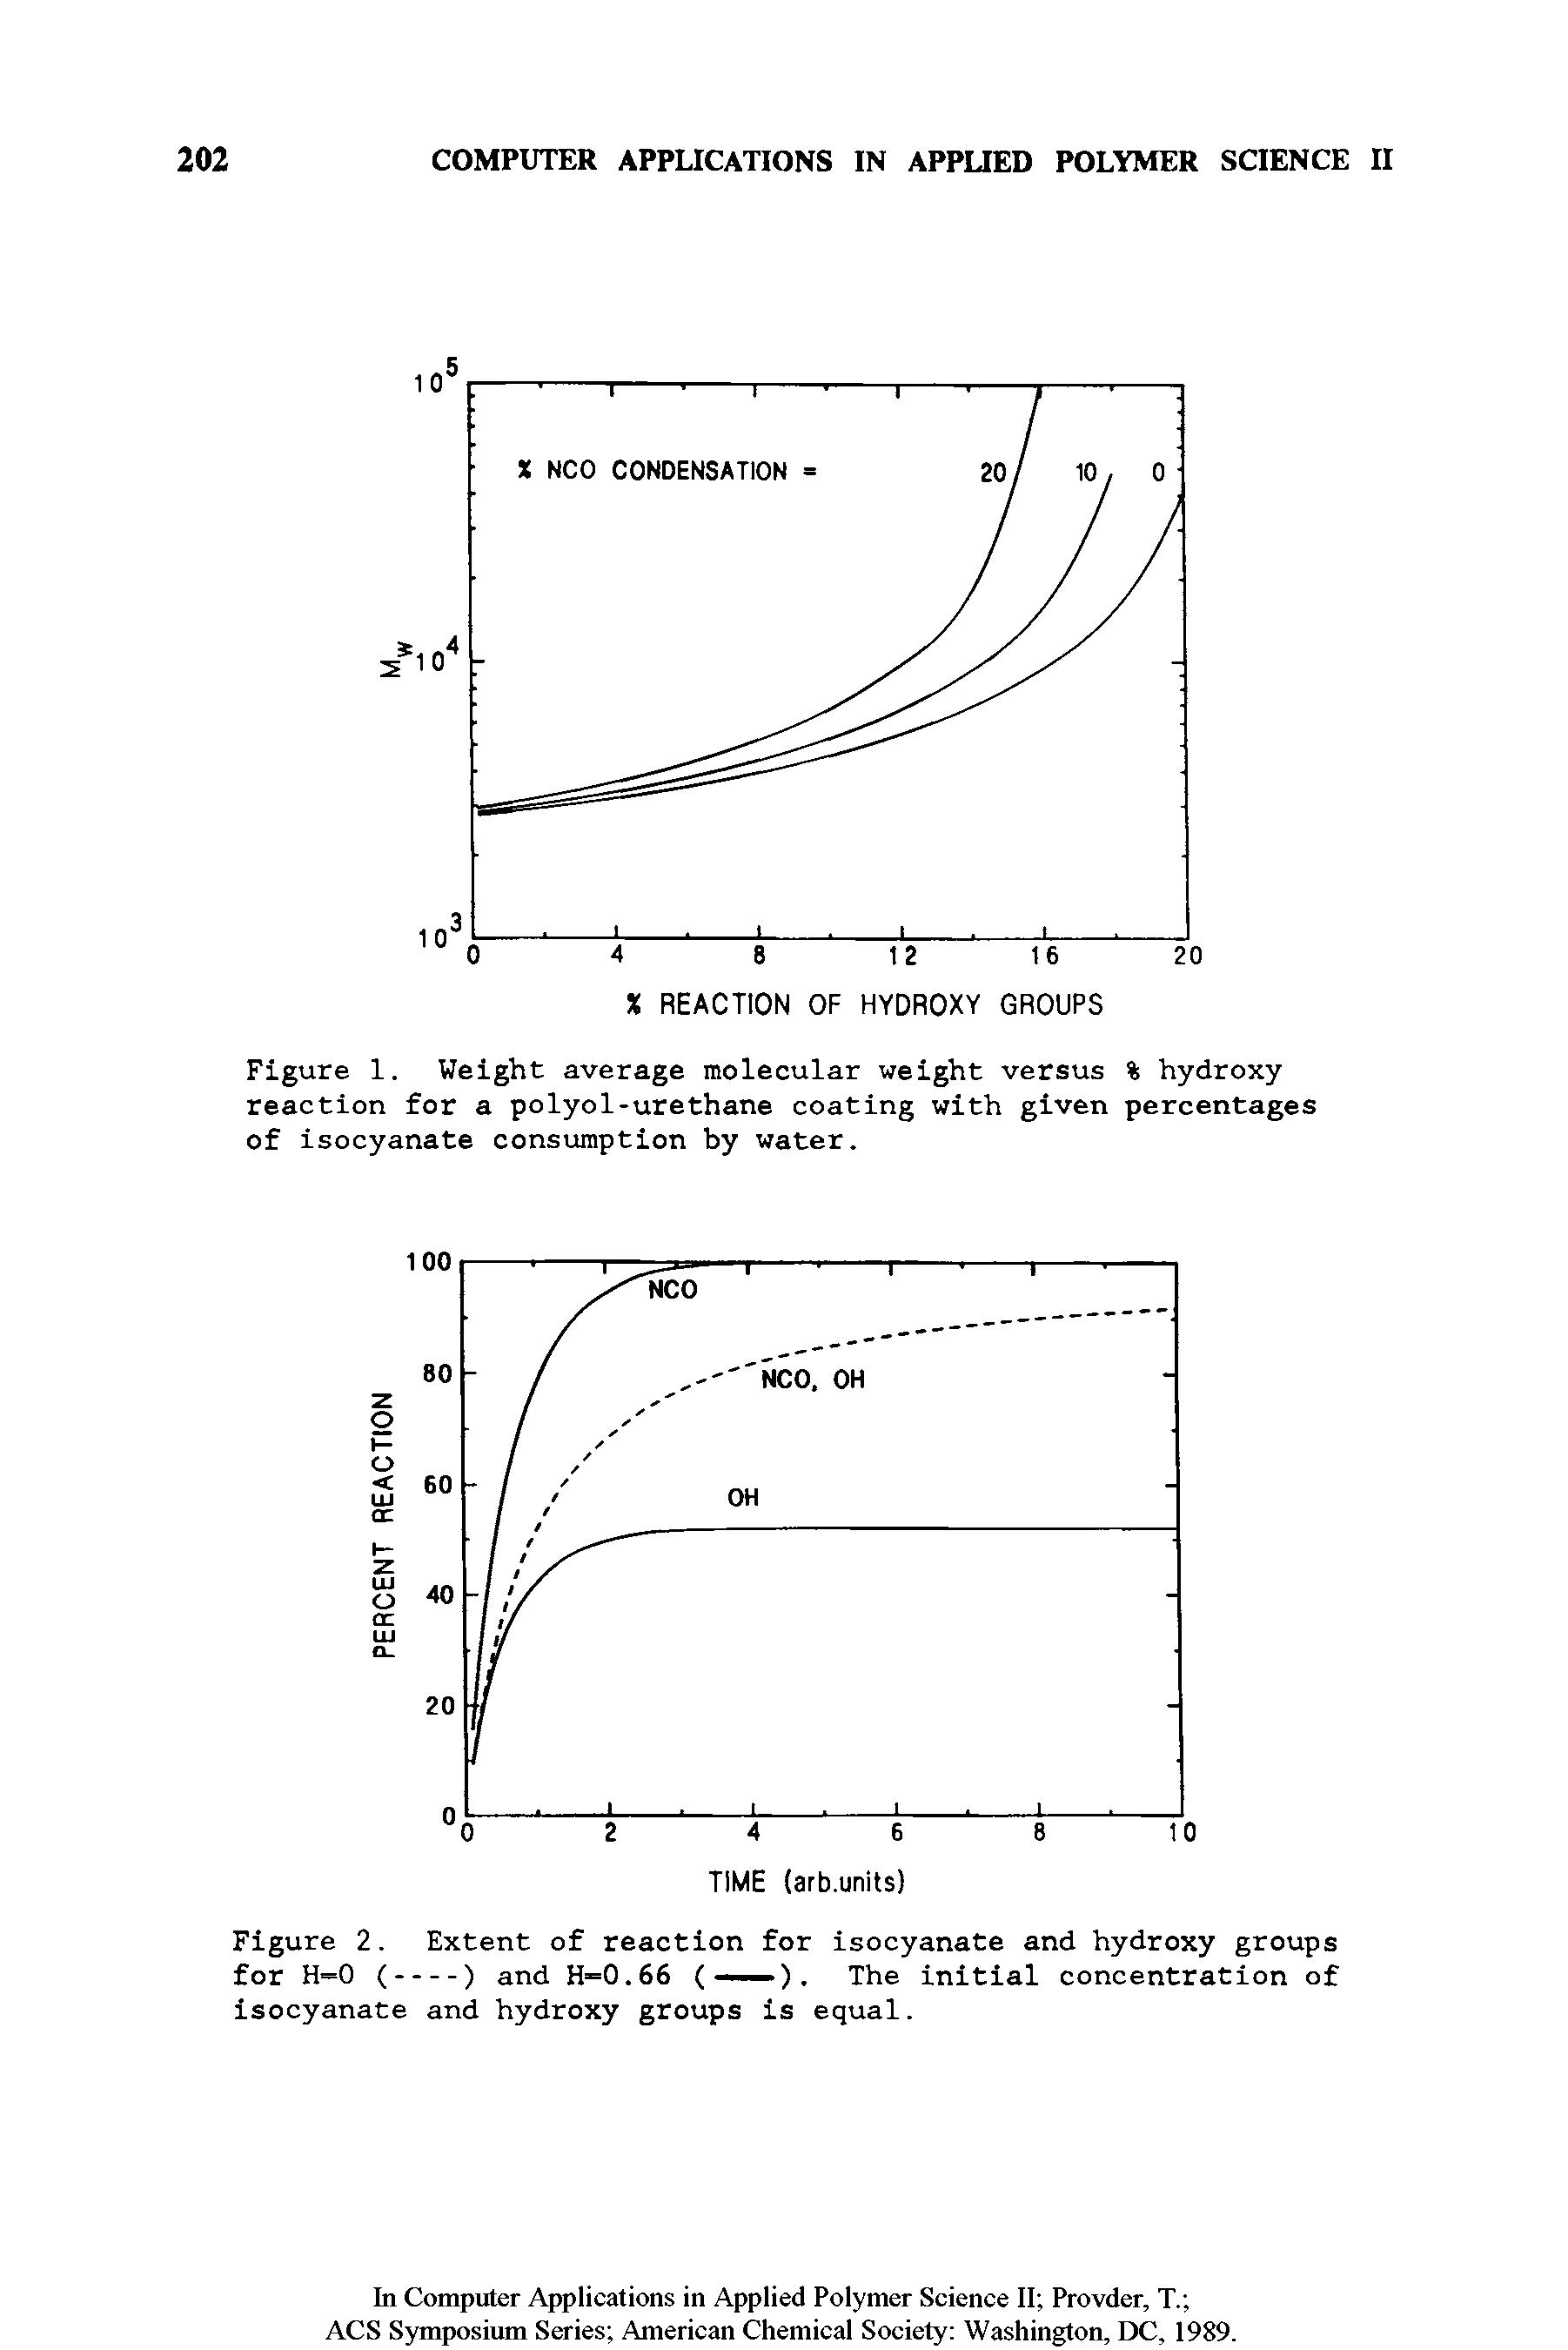 Figure 1. Weight average molecular weight versus % hydroxy reaction for a polyol-urethane coating with given percentages of isocyanate consumption by water.